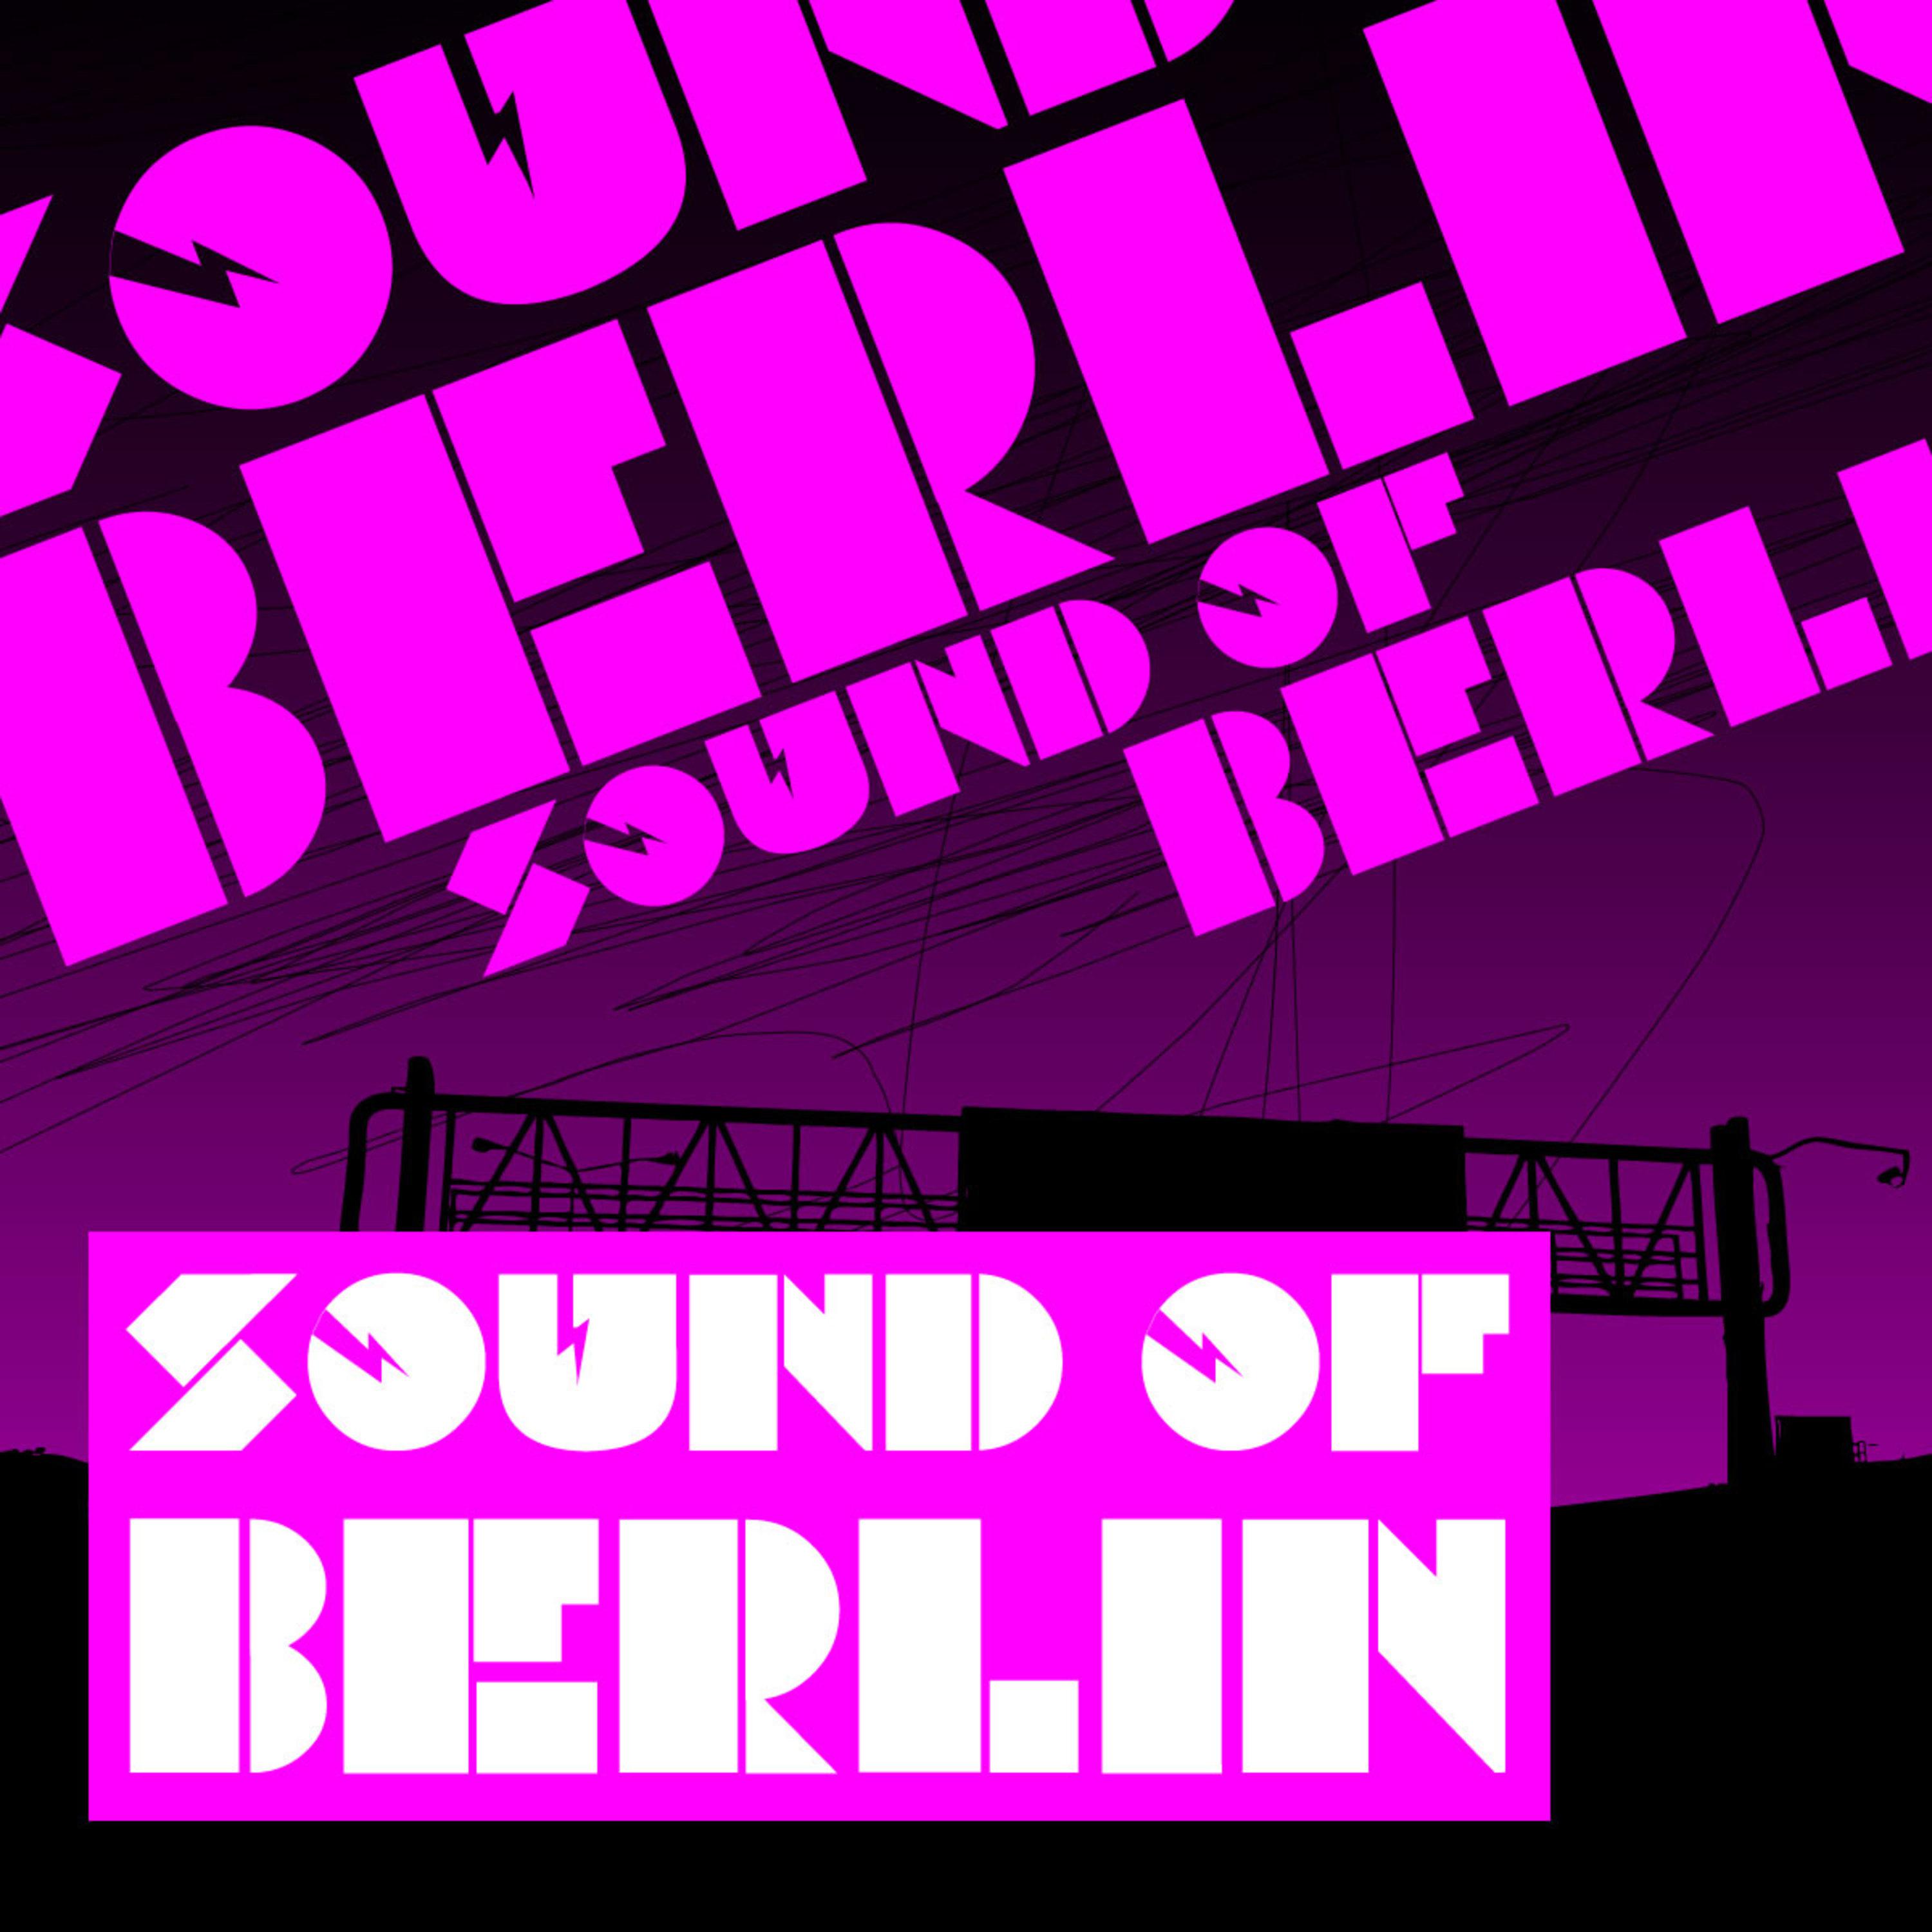 Sound of Berlin (1 - The Finest Club Sounds Selection of House, Electro, Minimal and Techno)